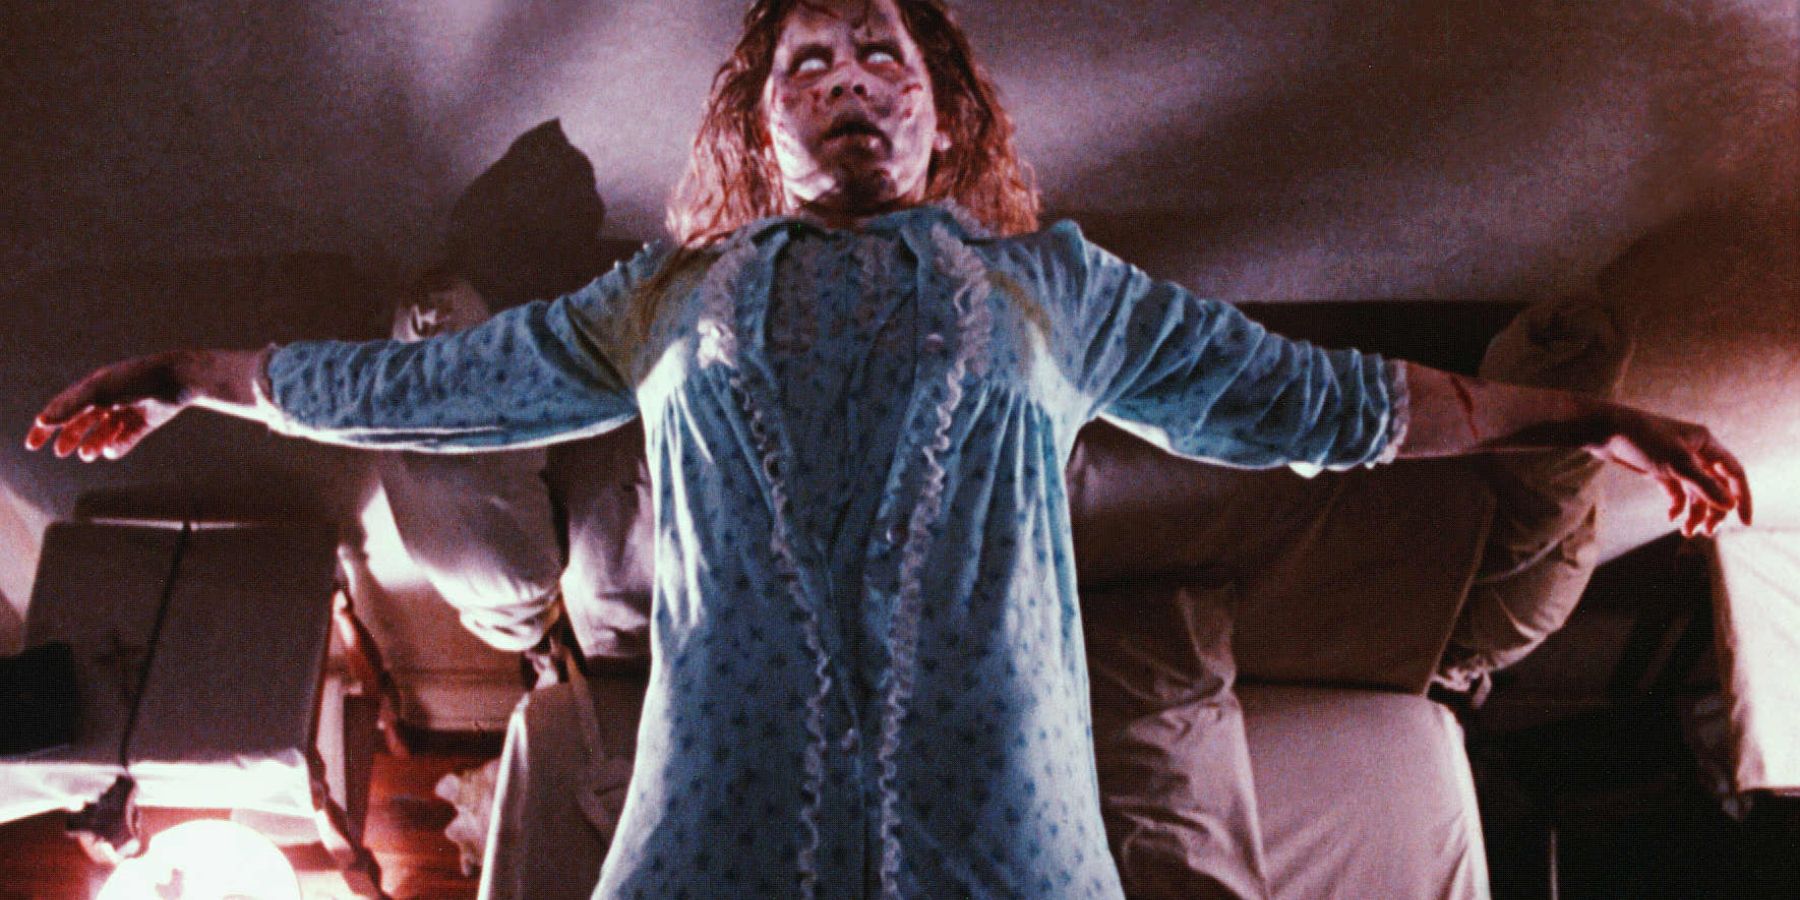 Reagan rising from her bed in The Exorcist